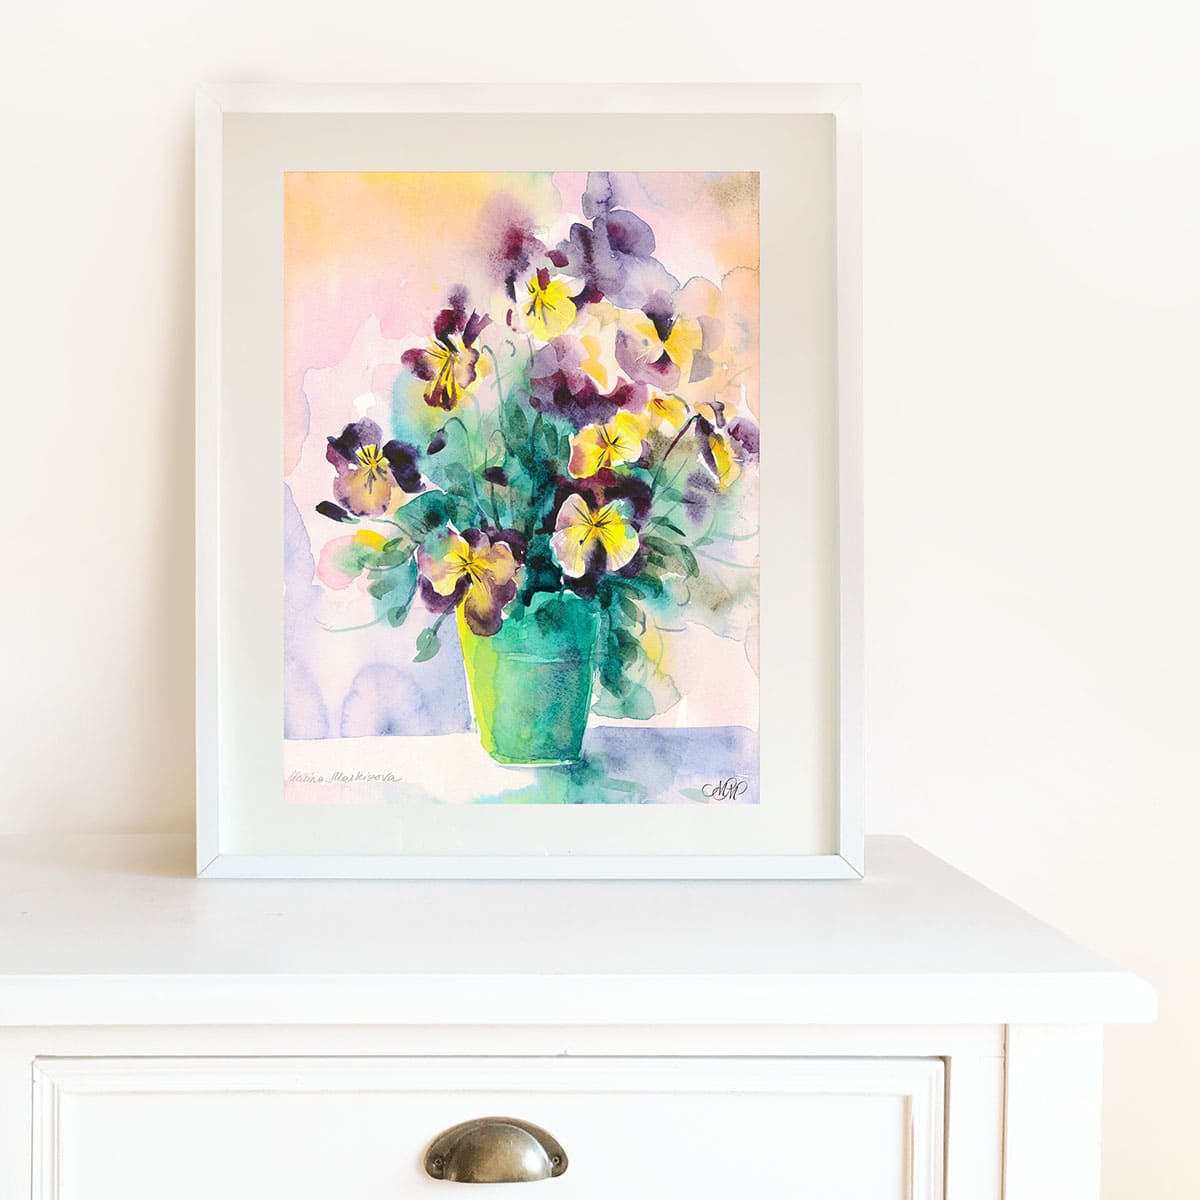 Bouquet of pansies. Framed watercolor painting for instant download